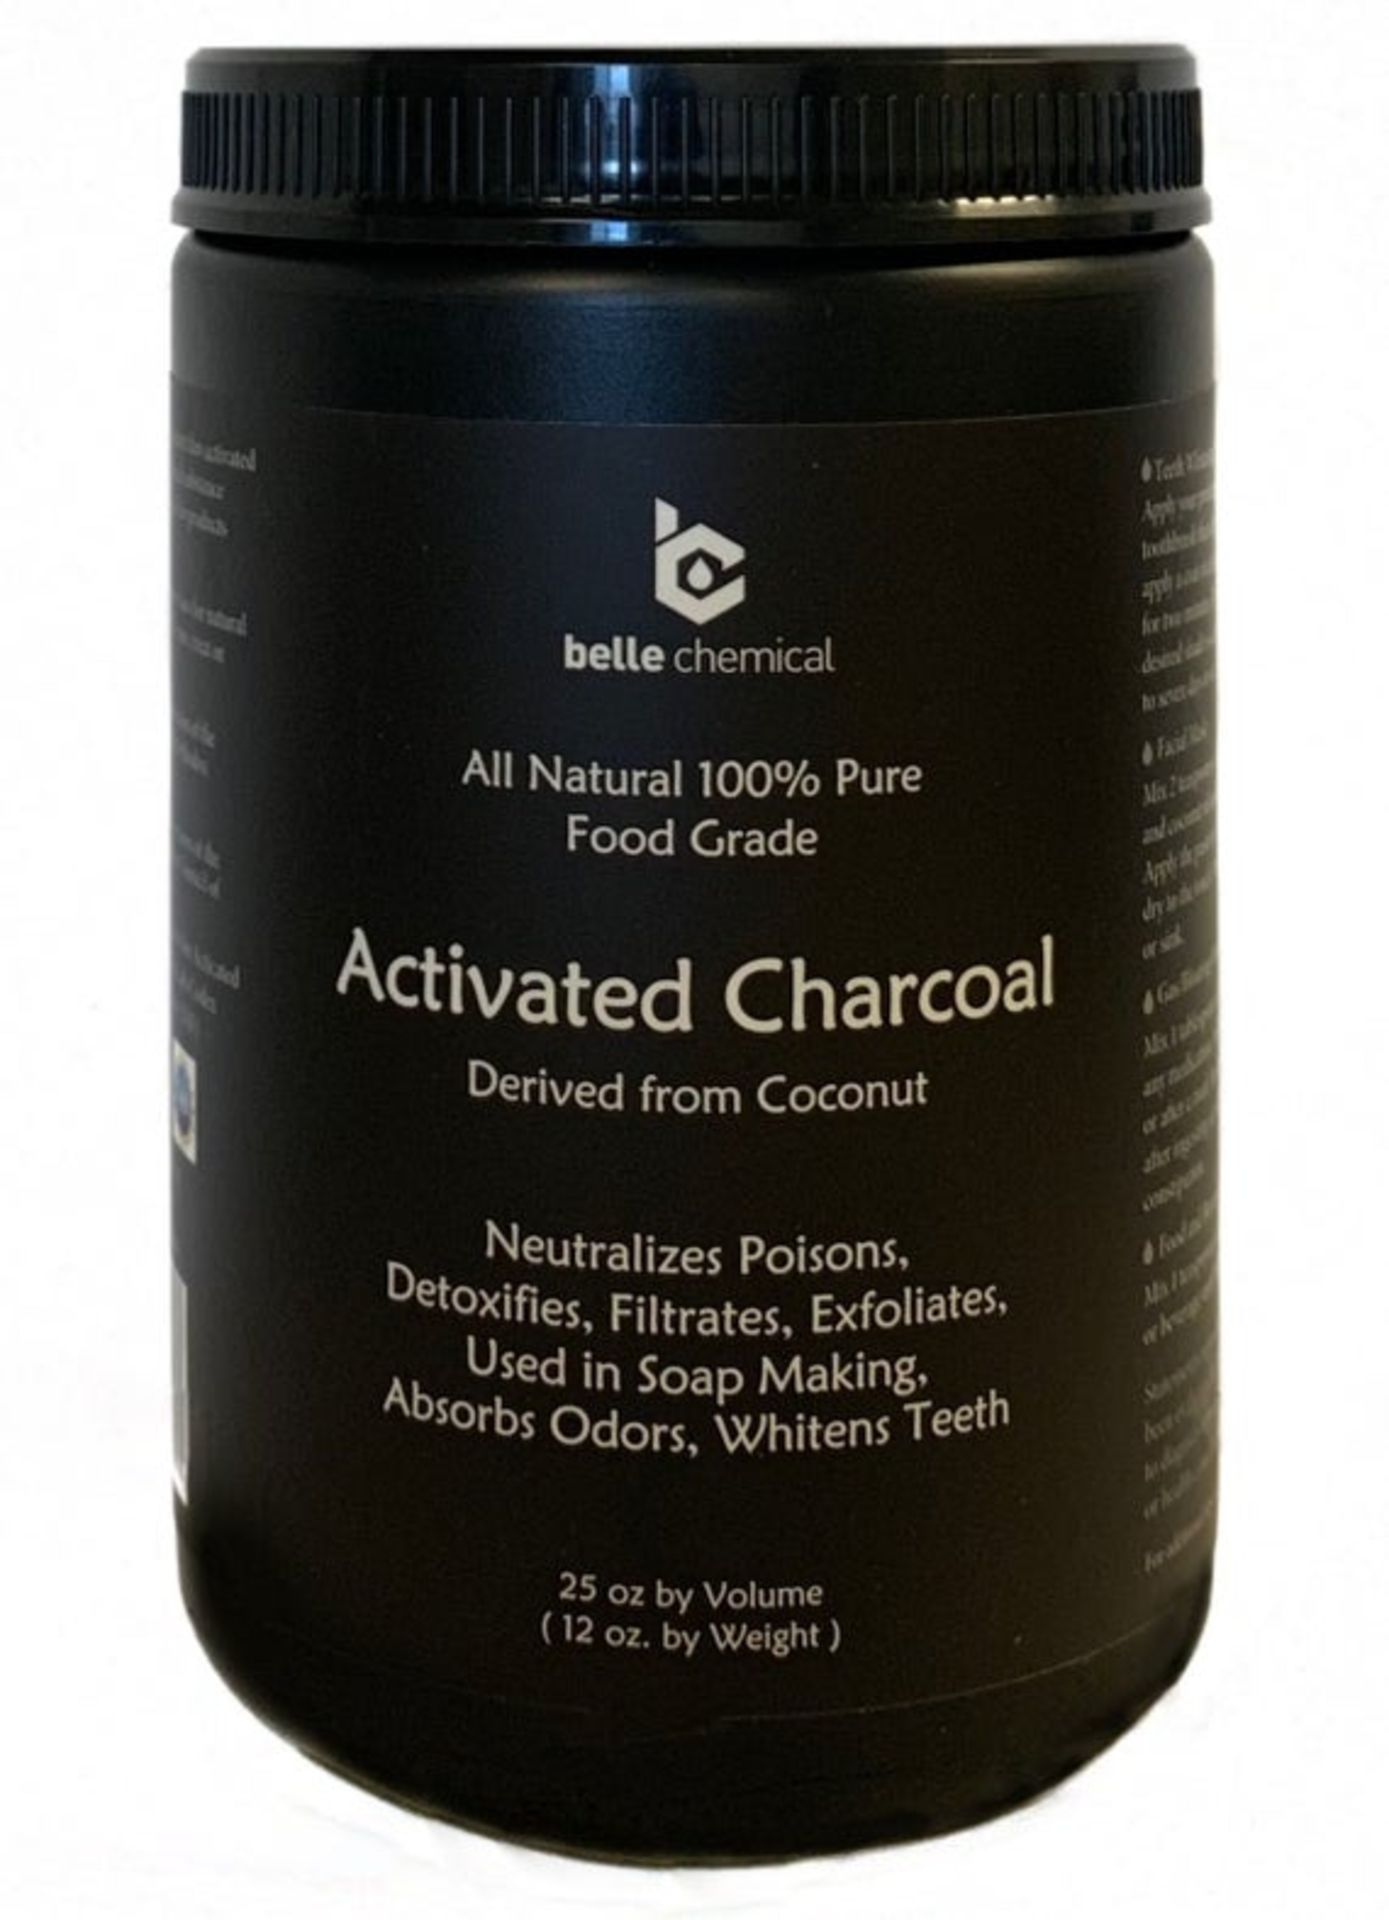 10 x Belle Chemical Activated Charcoal Derived From Coconut (26oz).